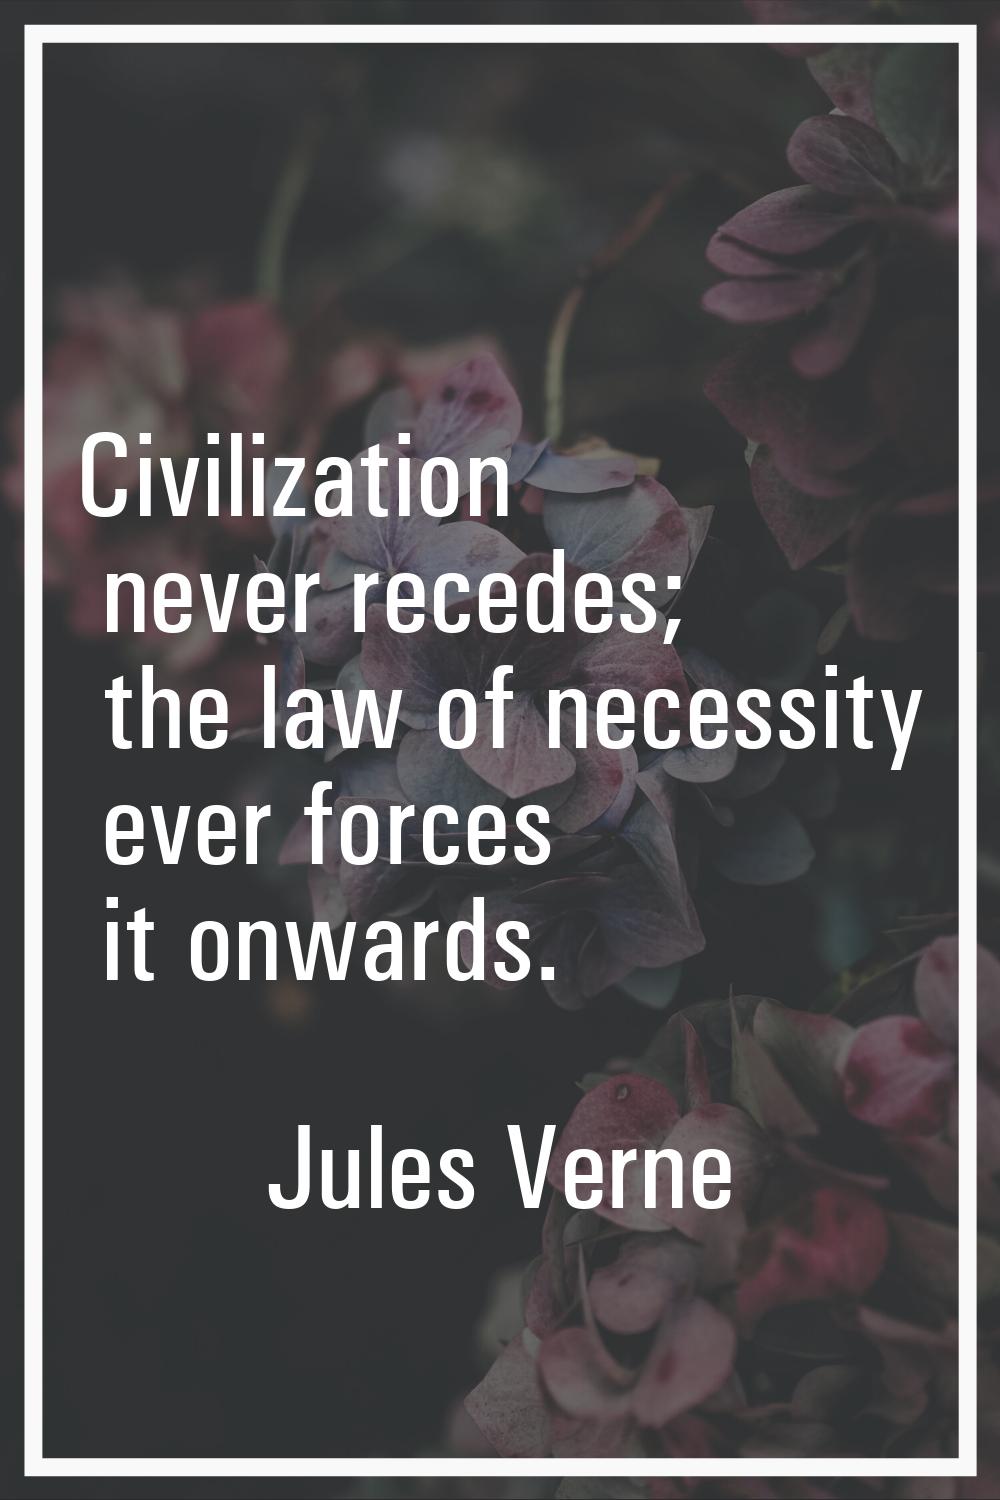 Civilization never recedes; the law of necessity ever forces it onwards.